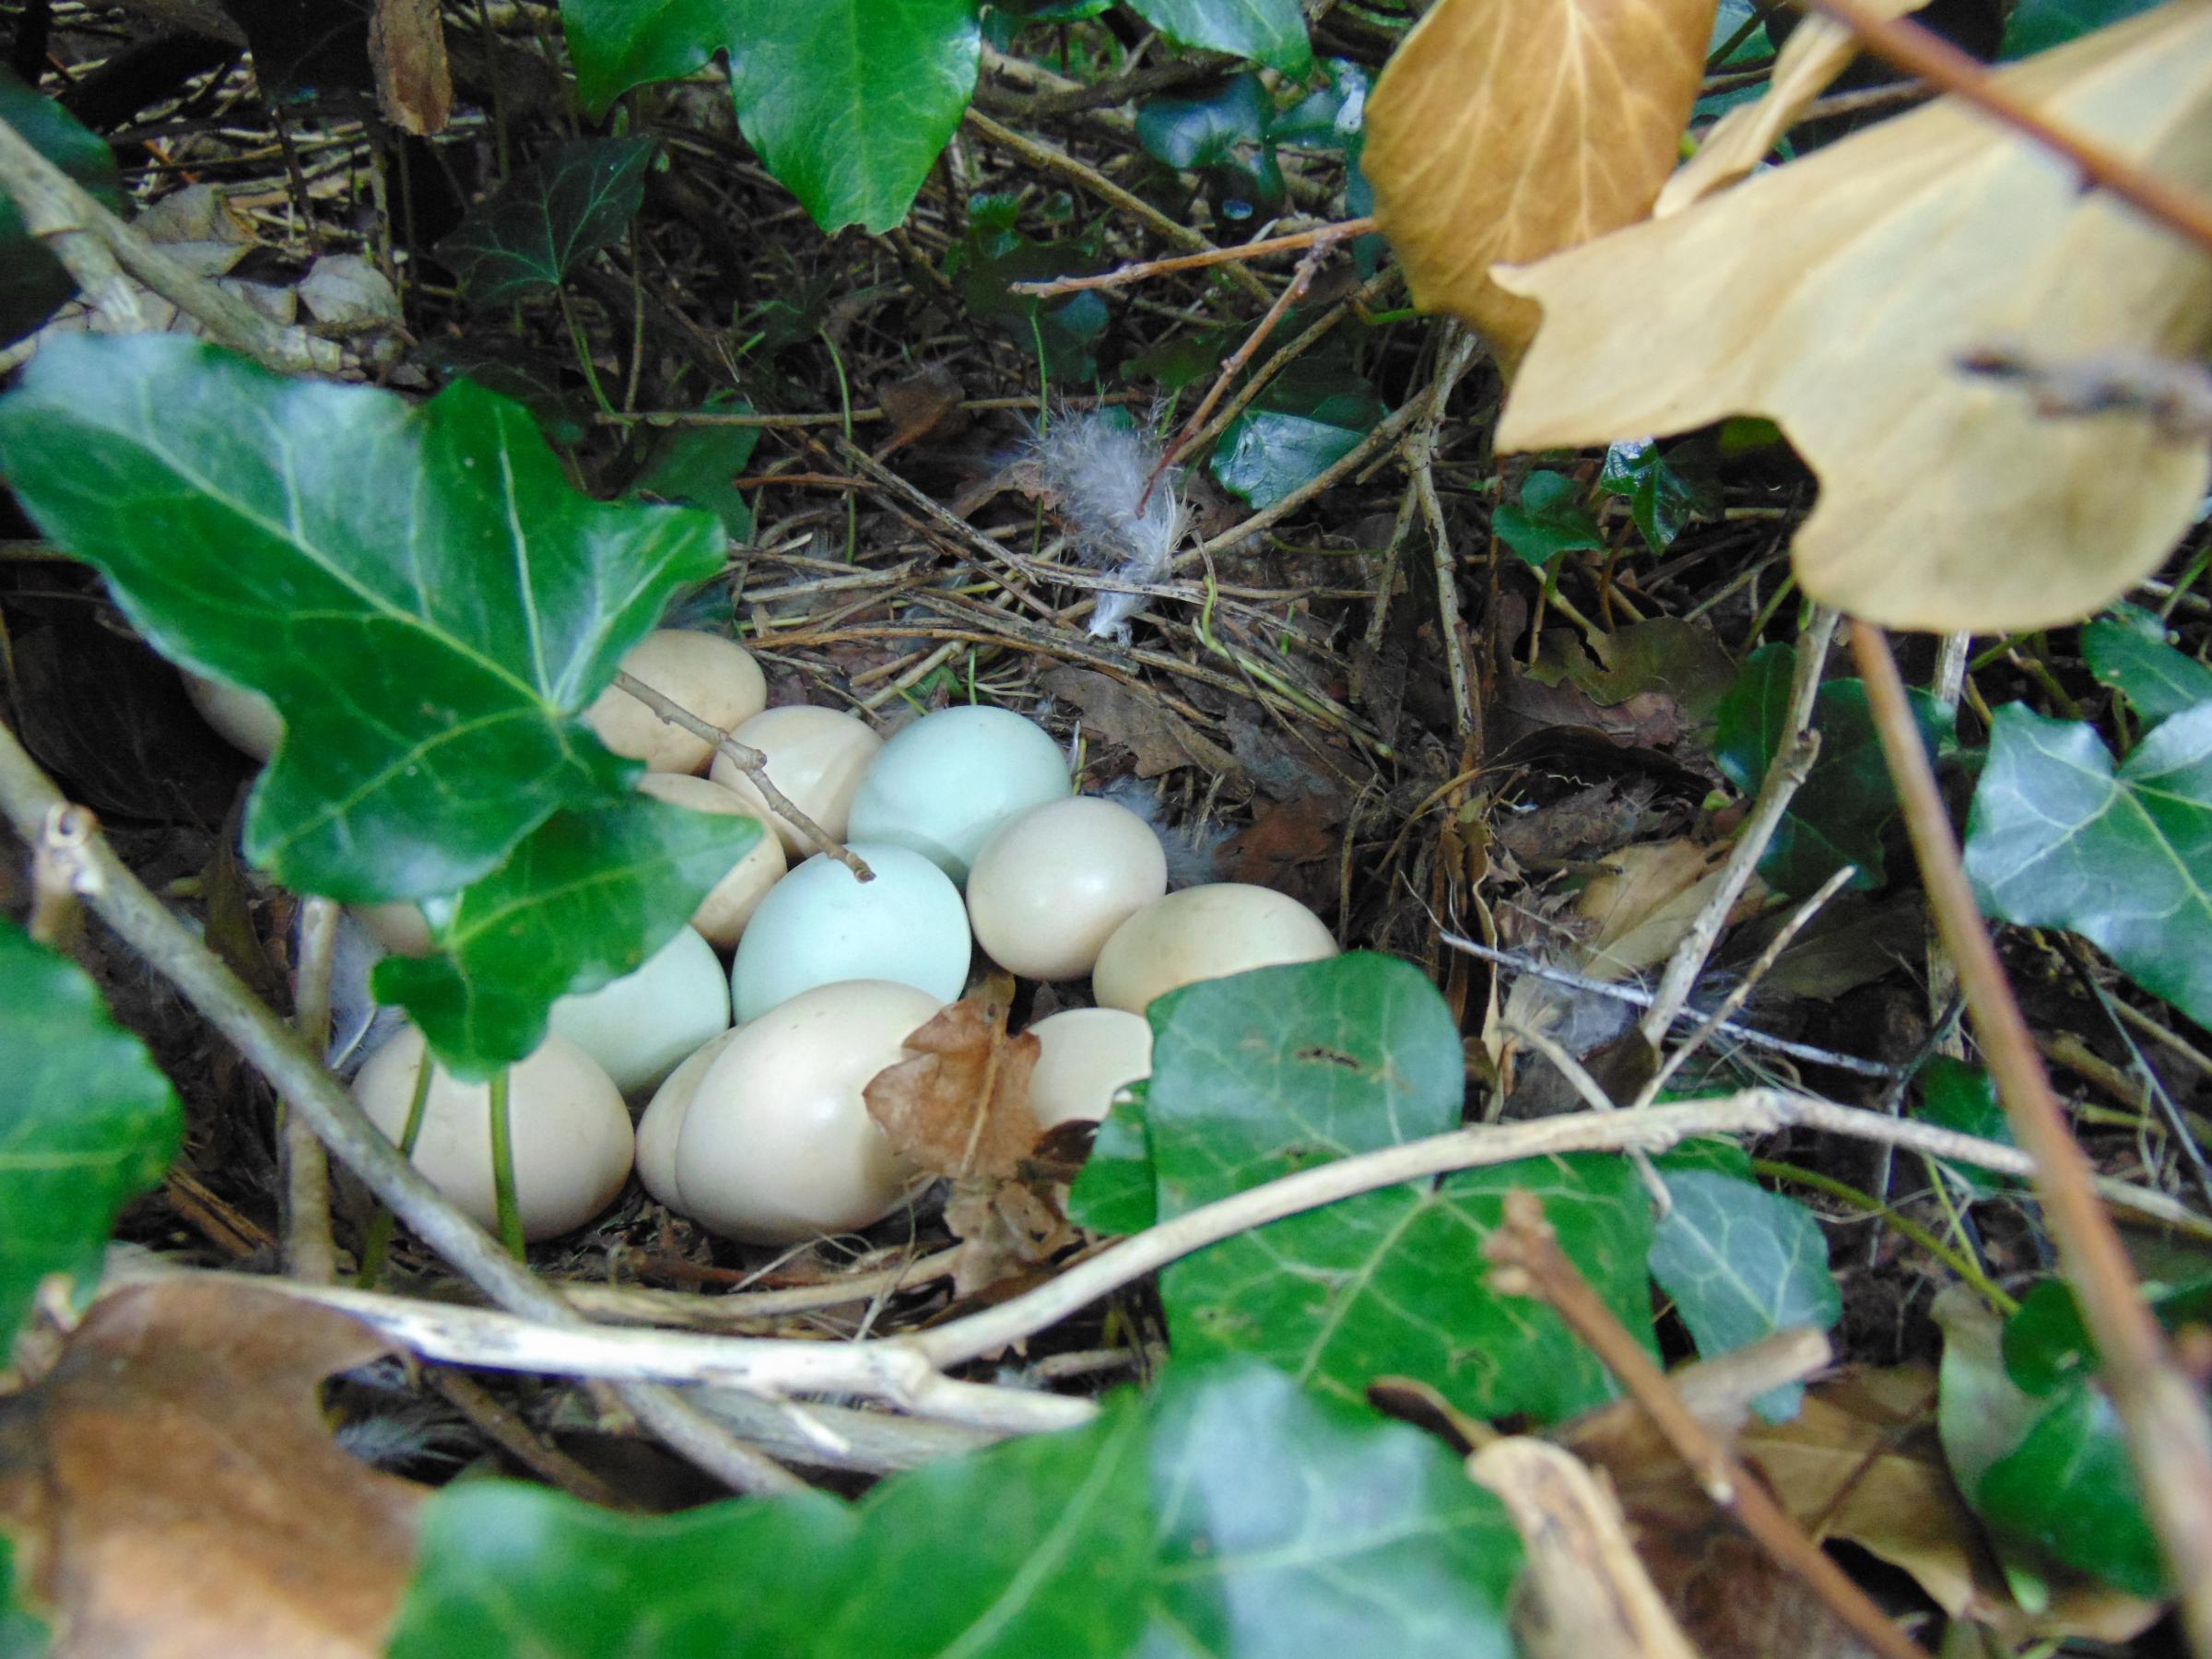 A well concealed chicken nest in the woods.